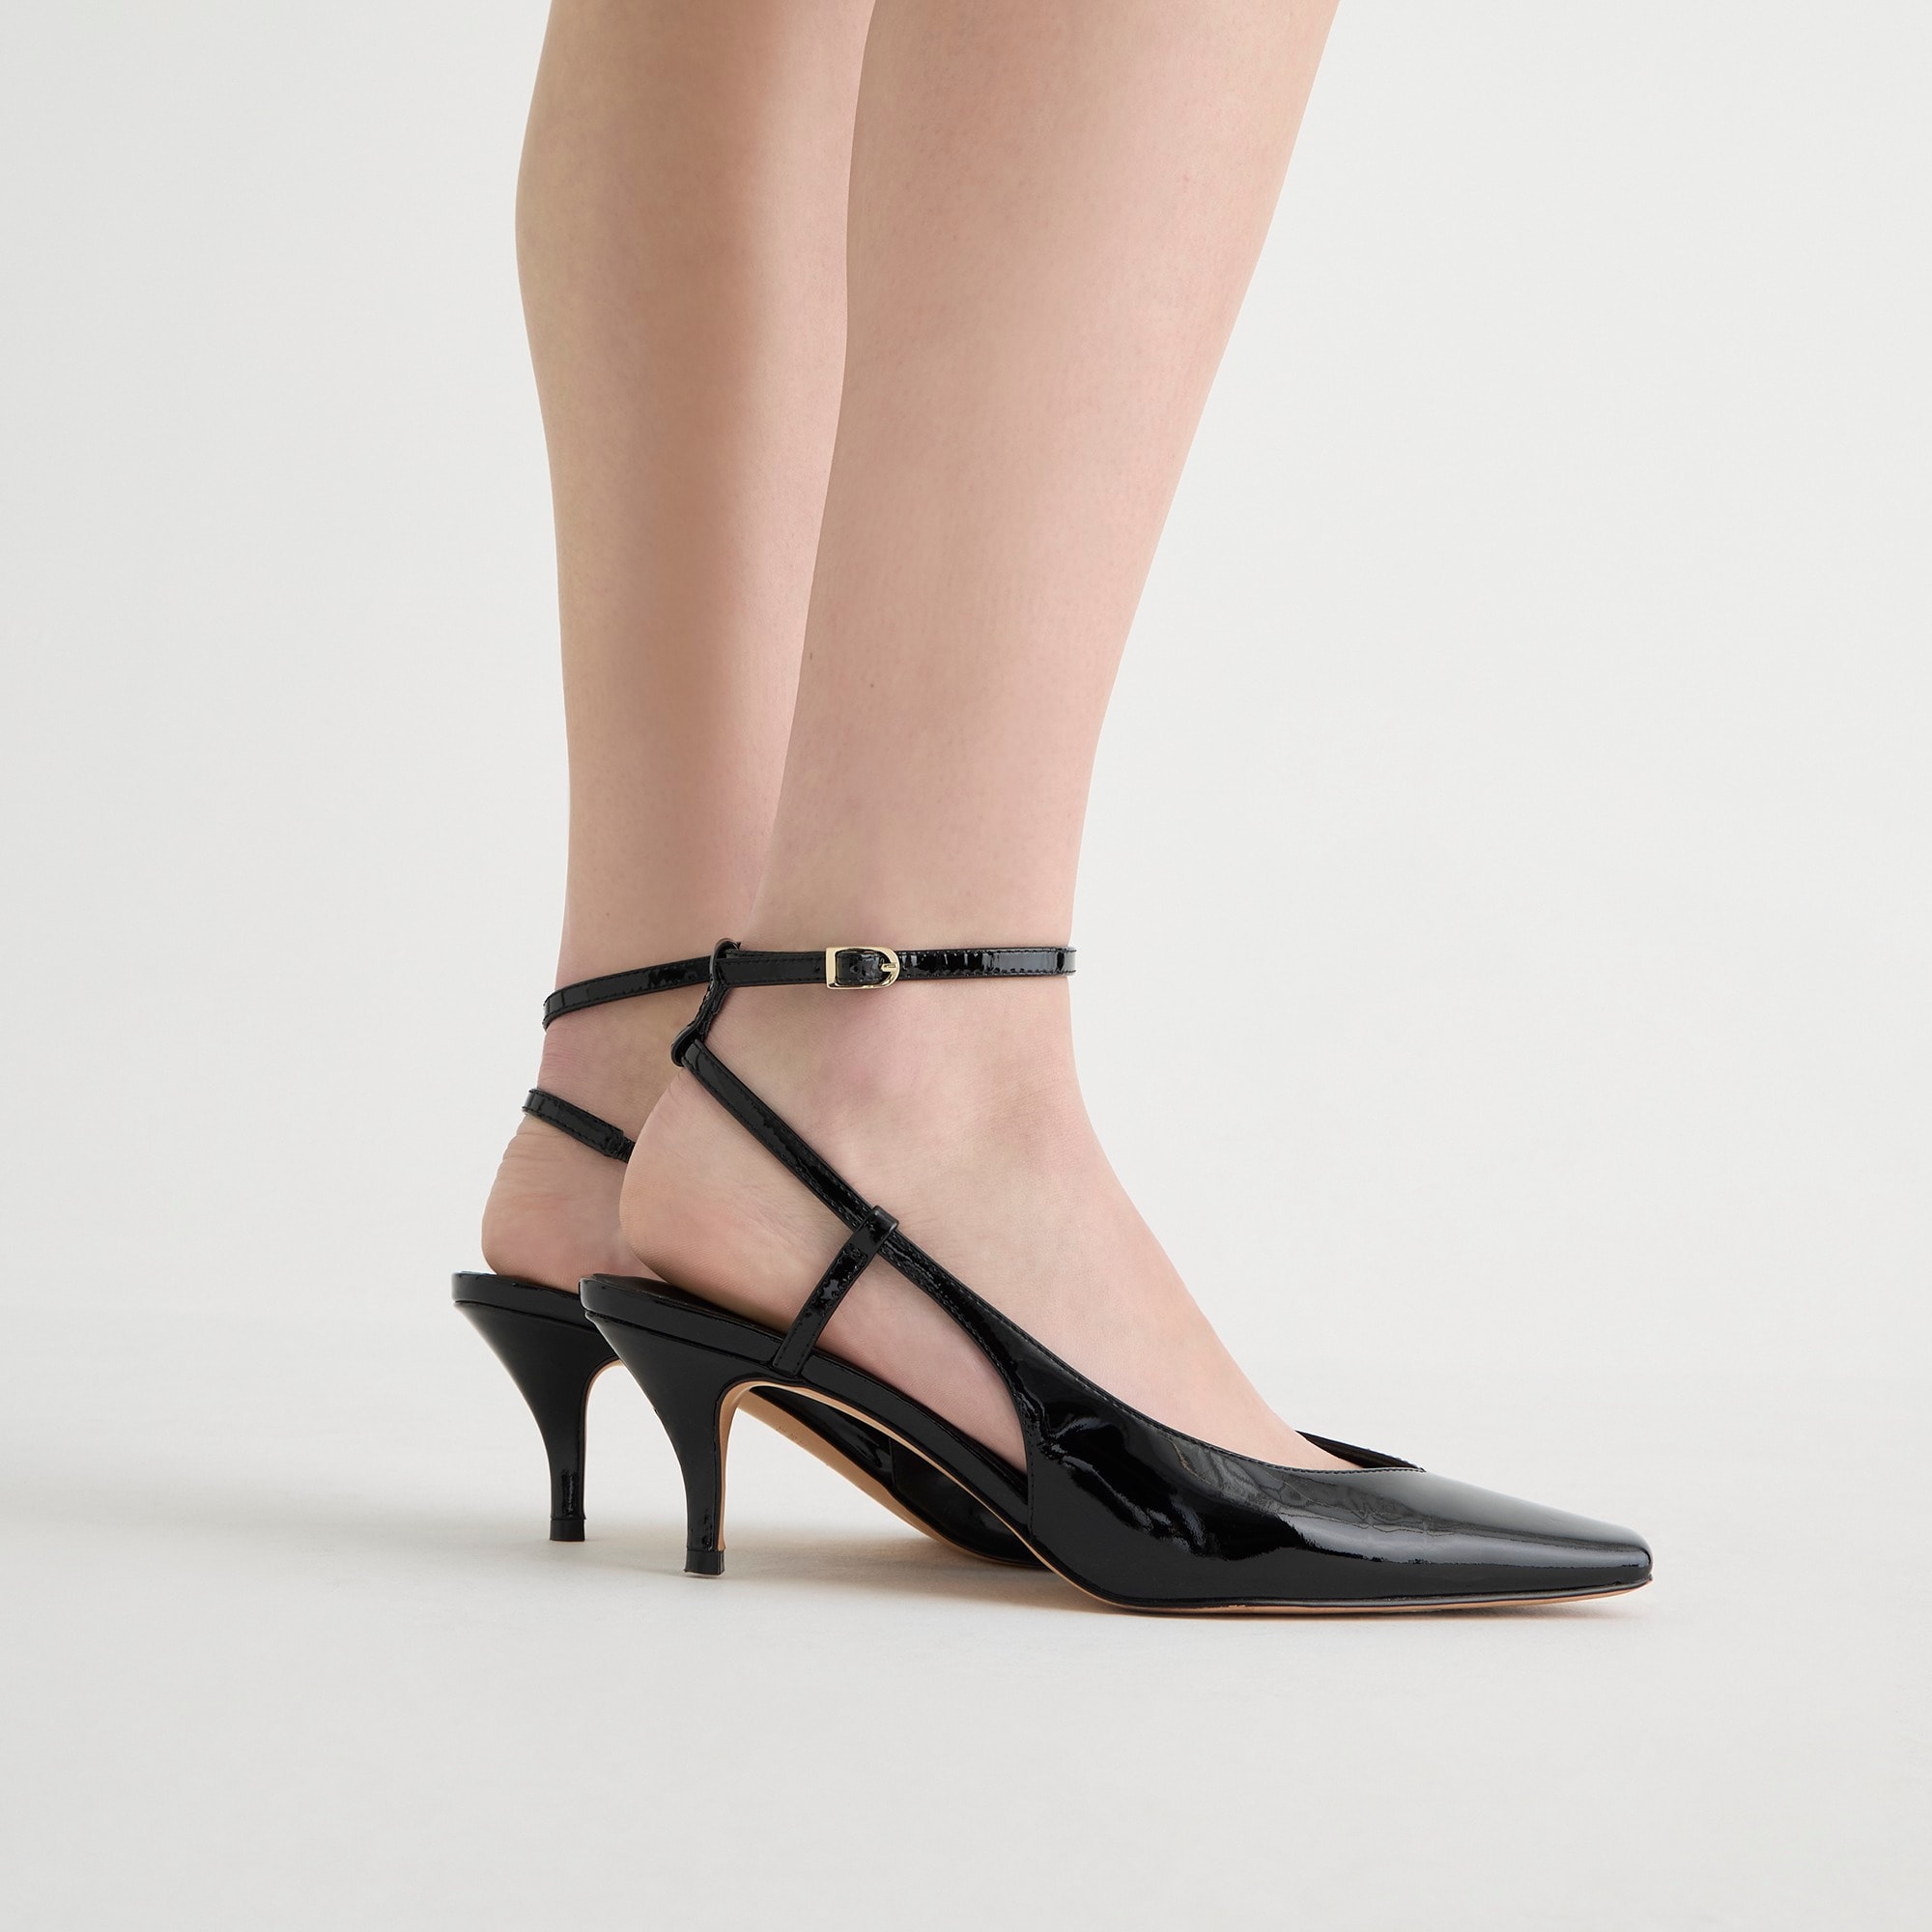 j.crew: leona ankle-strap heels in patent leather for women